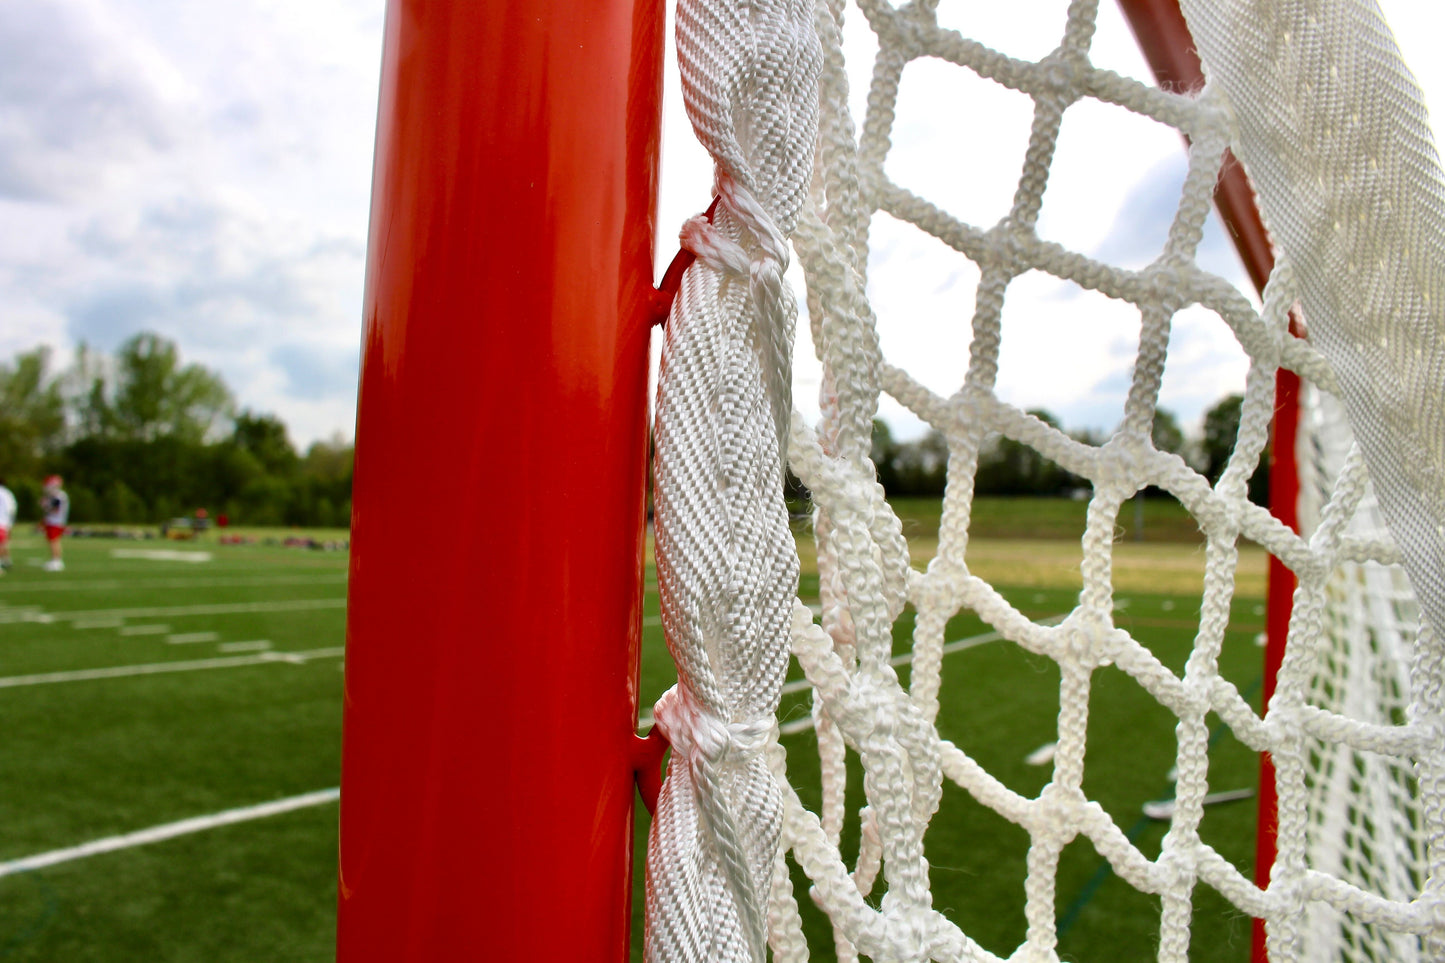 Pair (2x) of High School Practice Goals 6'x6'x7' by Crankshooter® Choice of 6mm white nets or black nets, posts w/ lacing rails, 59 lbs each - Free Shipping